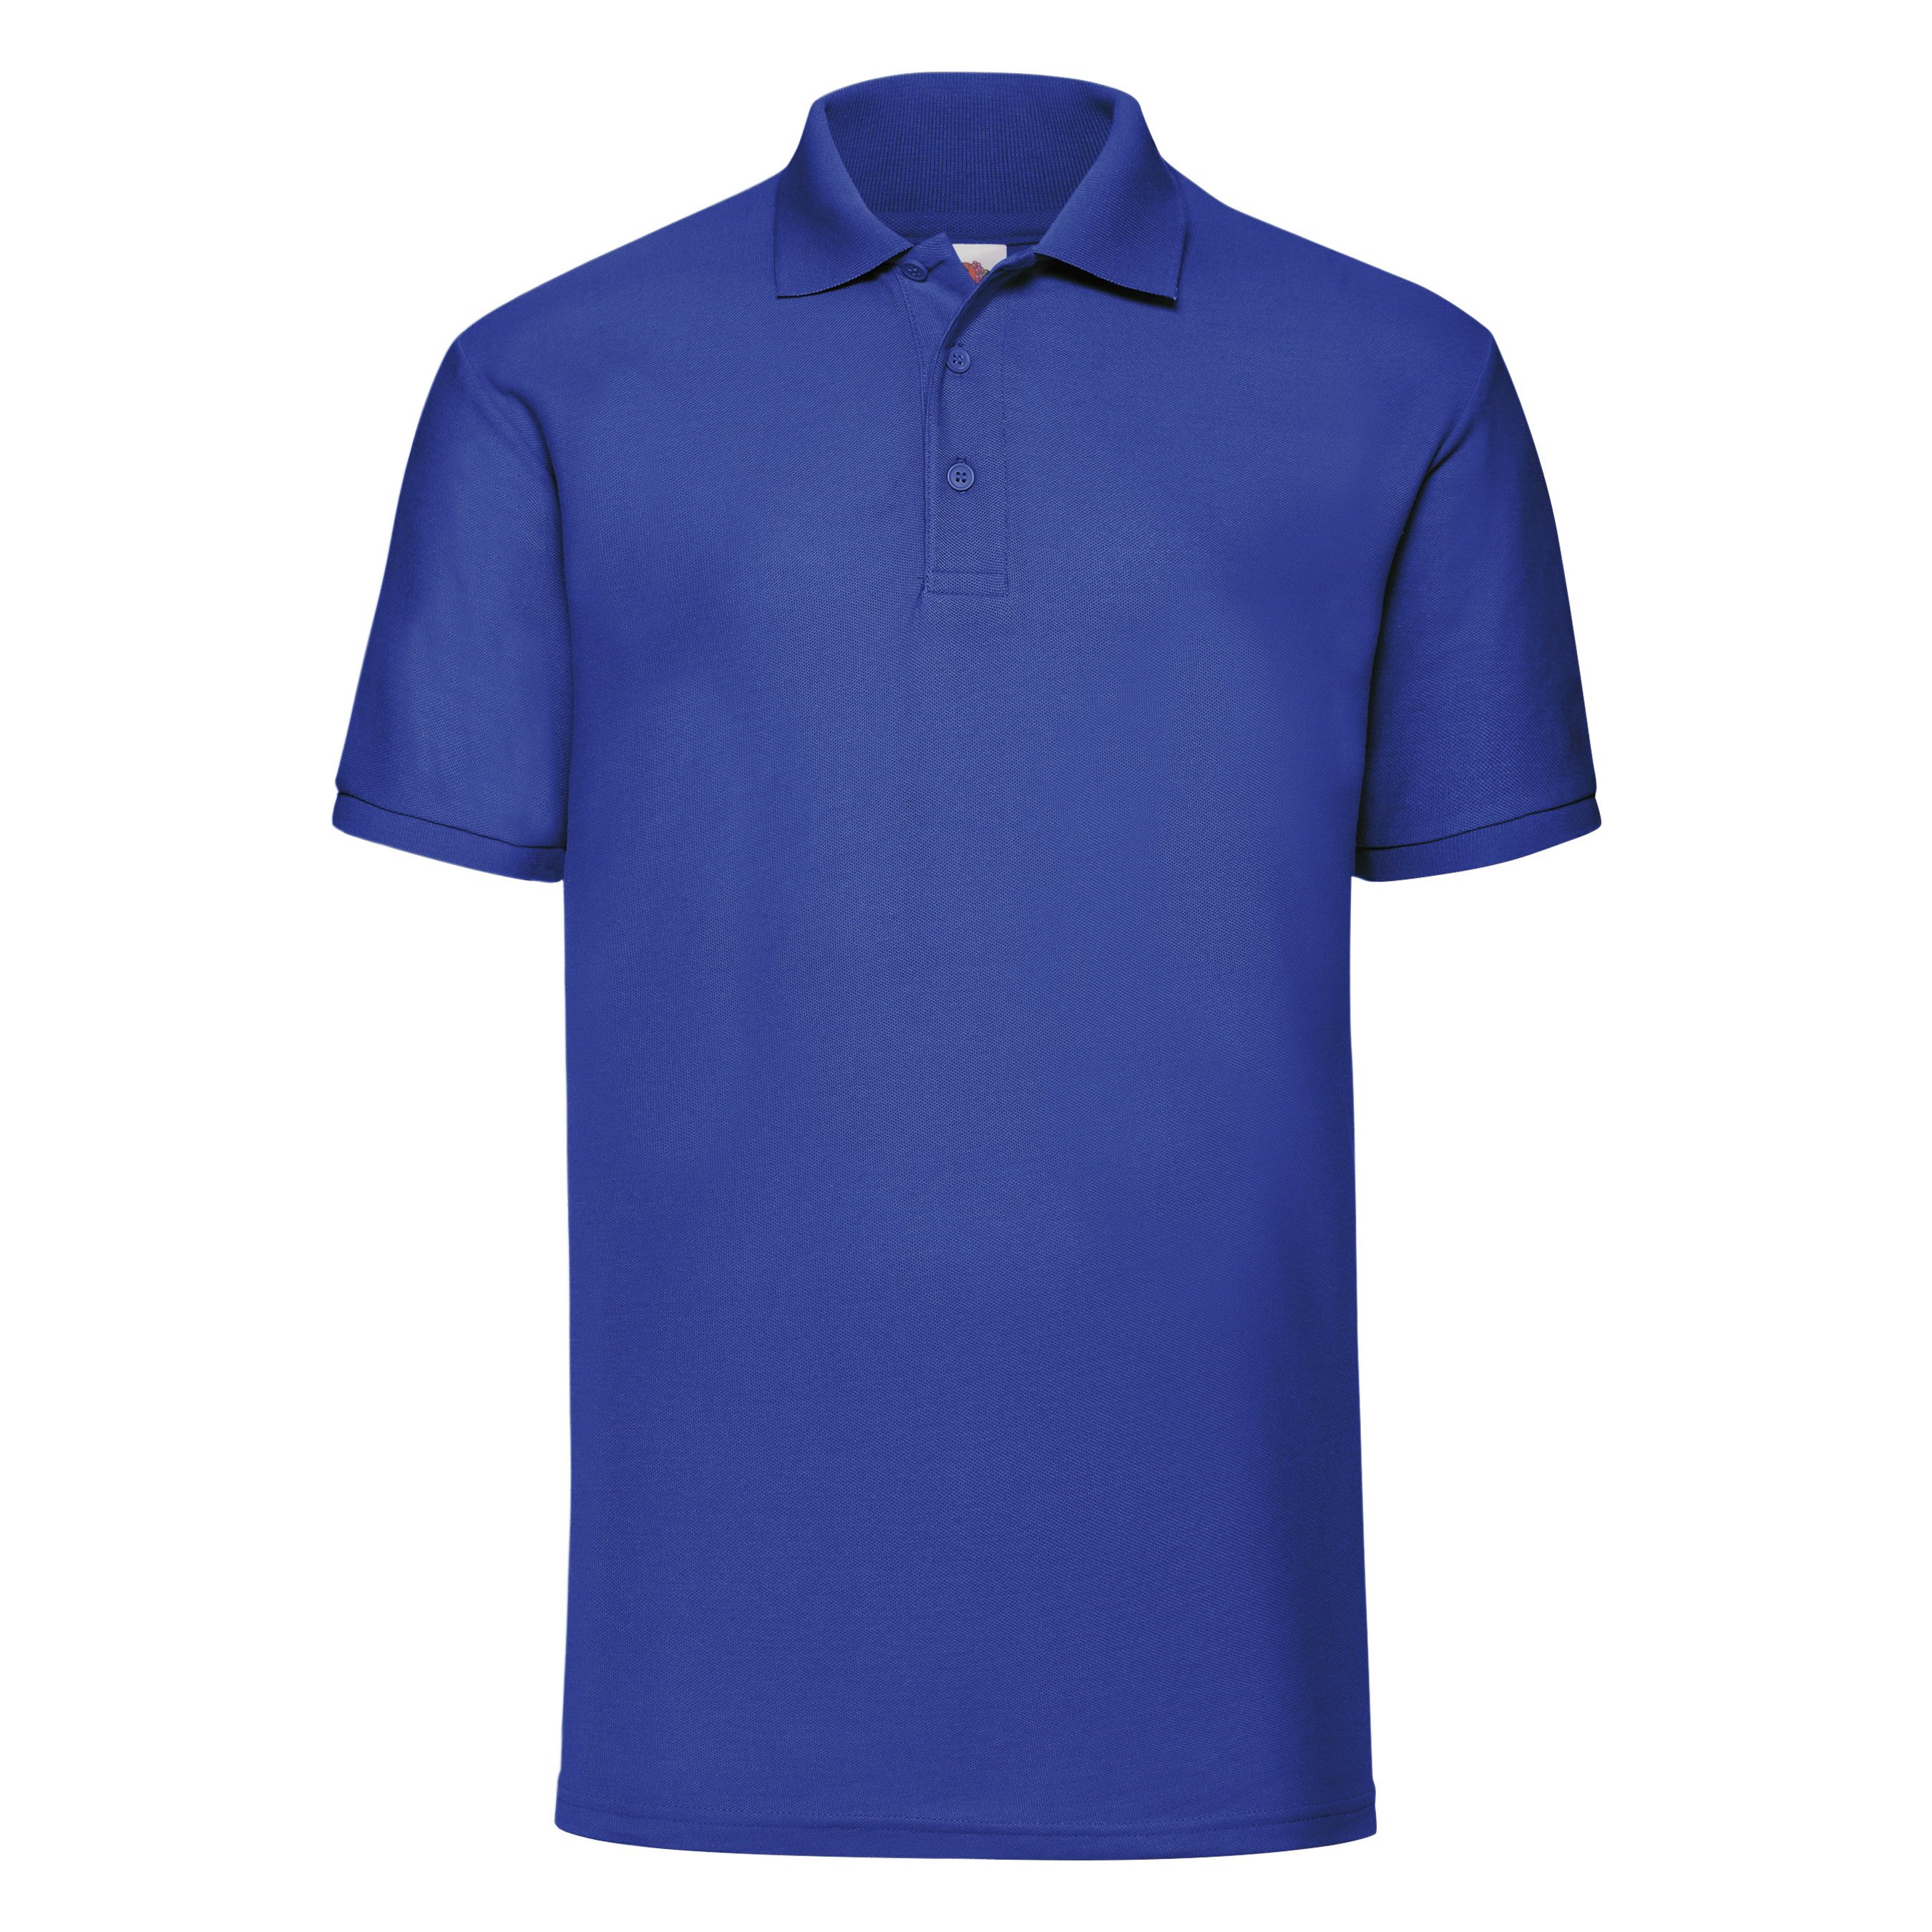 ax-httpswebsystems.s3.amazonaws.comtmp_for_downloadfruit-of-the-loom-65-35-polo-royal-blue.jpg